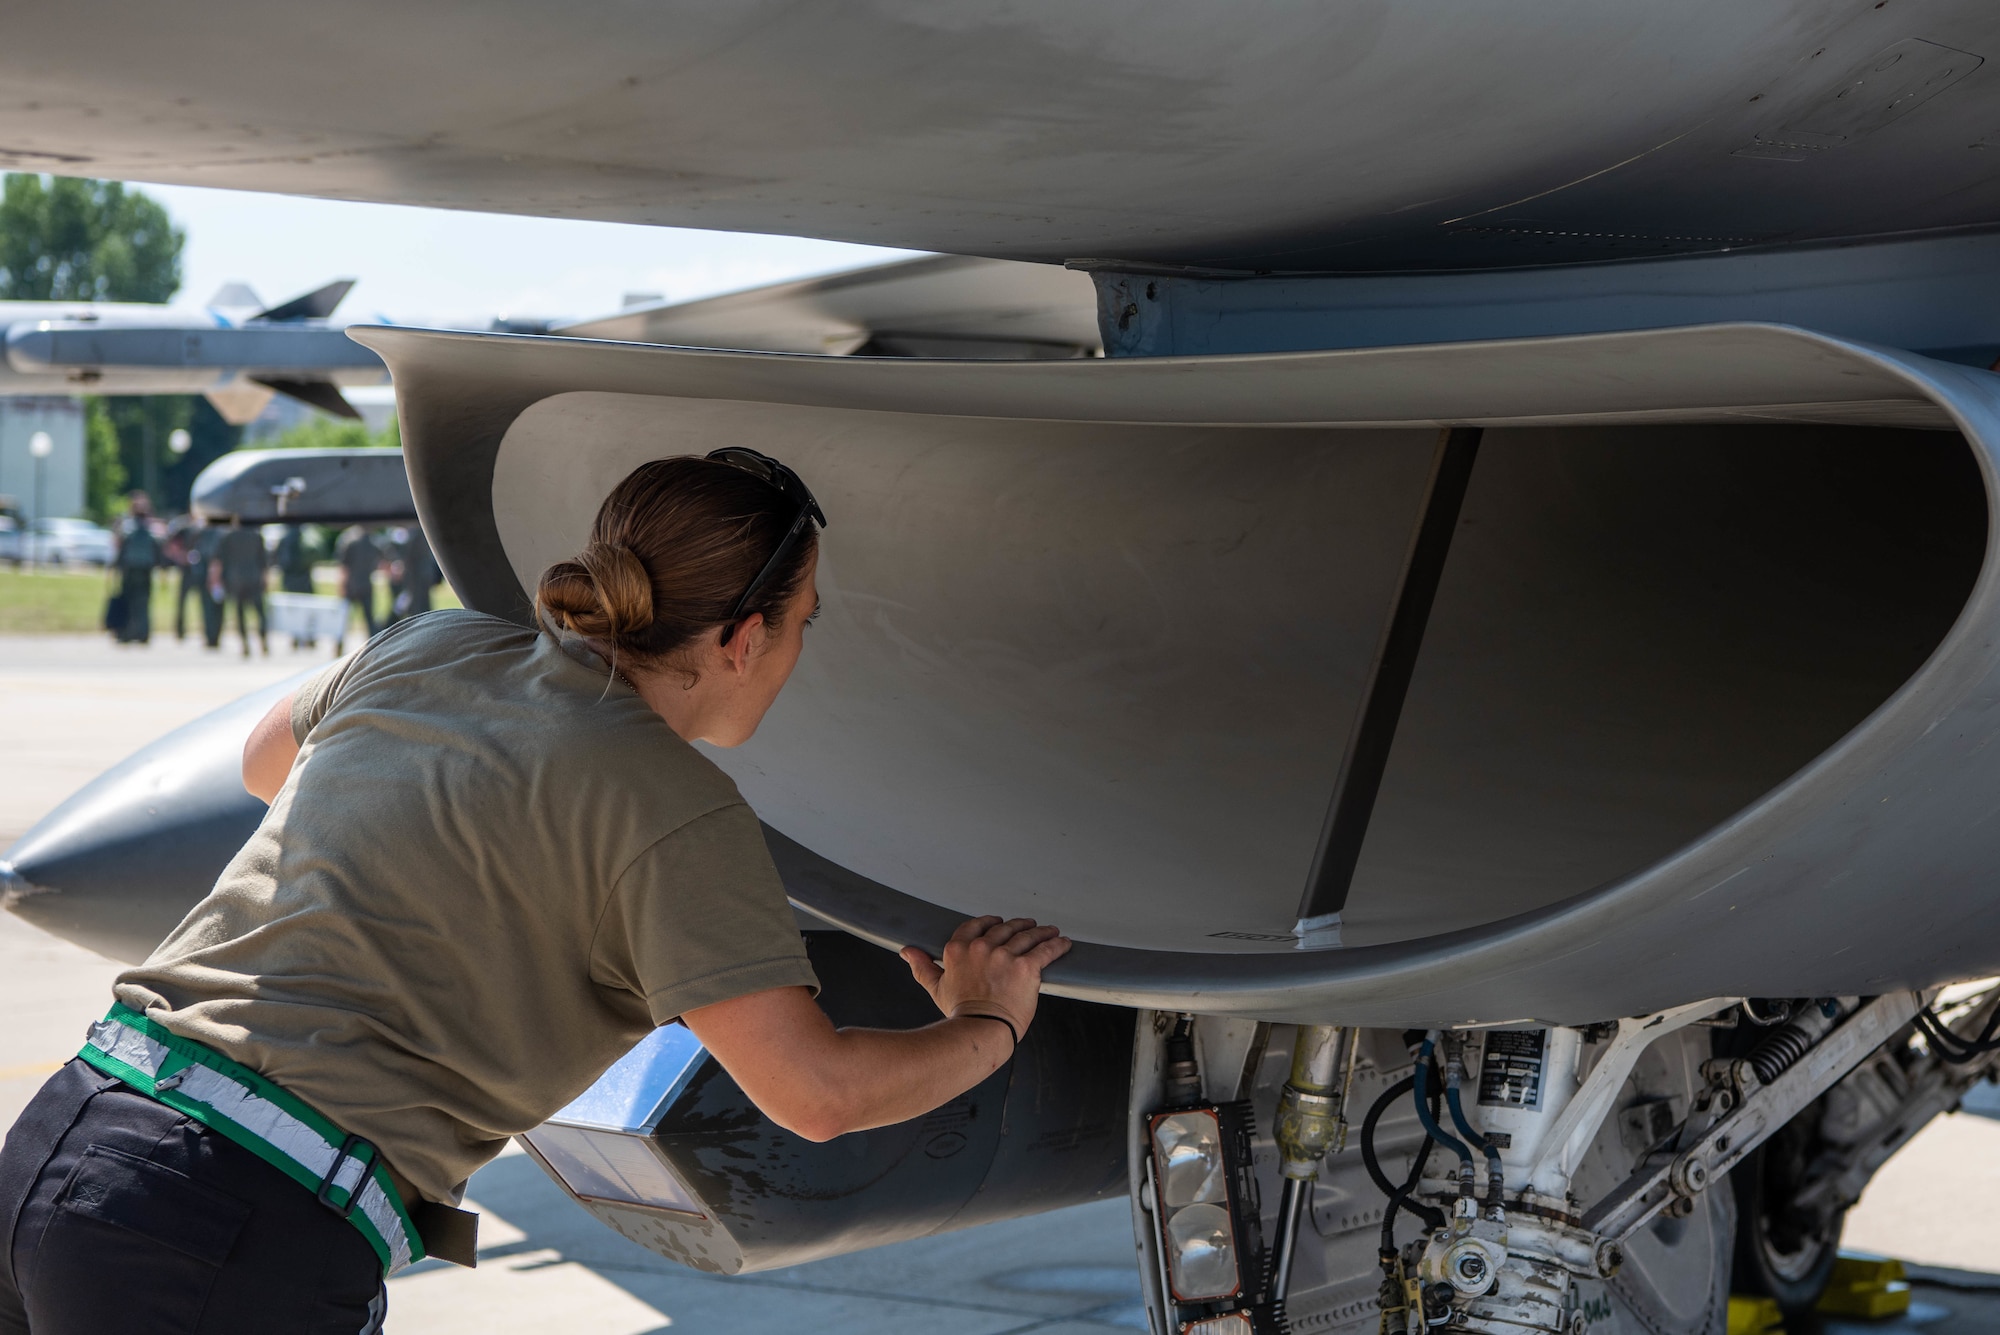 Senior Airman Brooke Parks, 555th Aircraft Maintenance Unit F-16 Fighting Falcon crew chief, inspects the intake of a U.S. Air Force F-16 during exercise Thracian Star 21 at Graf Ignatievo Air Base, Bulgaria, July 9, 2021. Out of 61 total crew chiefs in the 555th AMU, Parks is the only female crew chief who works on the flightline. (U.S. Air Force photo by Airman 1st Class Brooke Moeder)